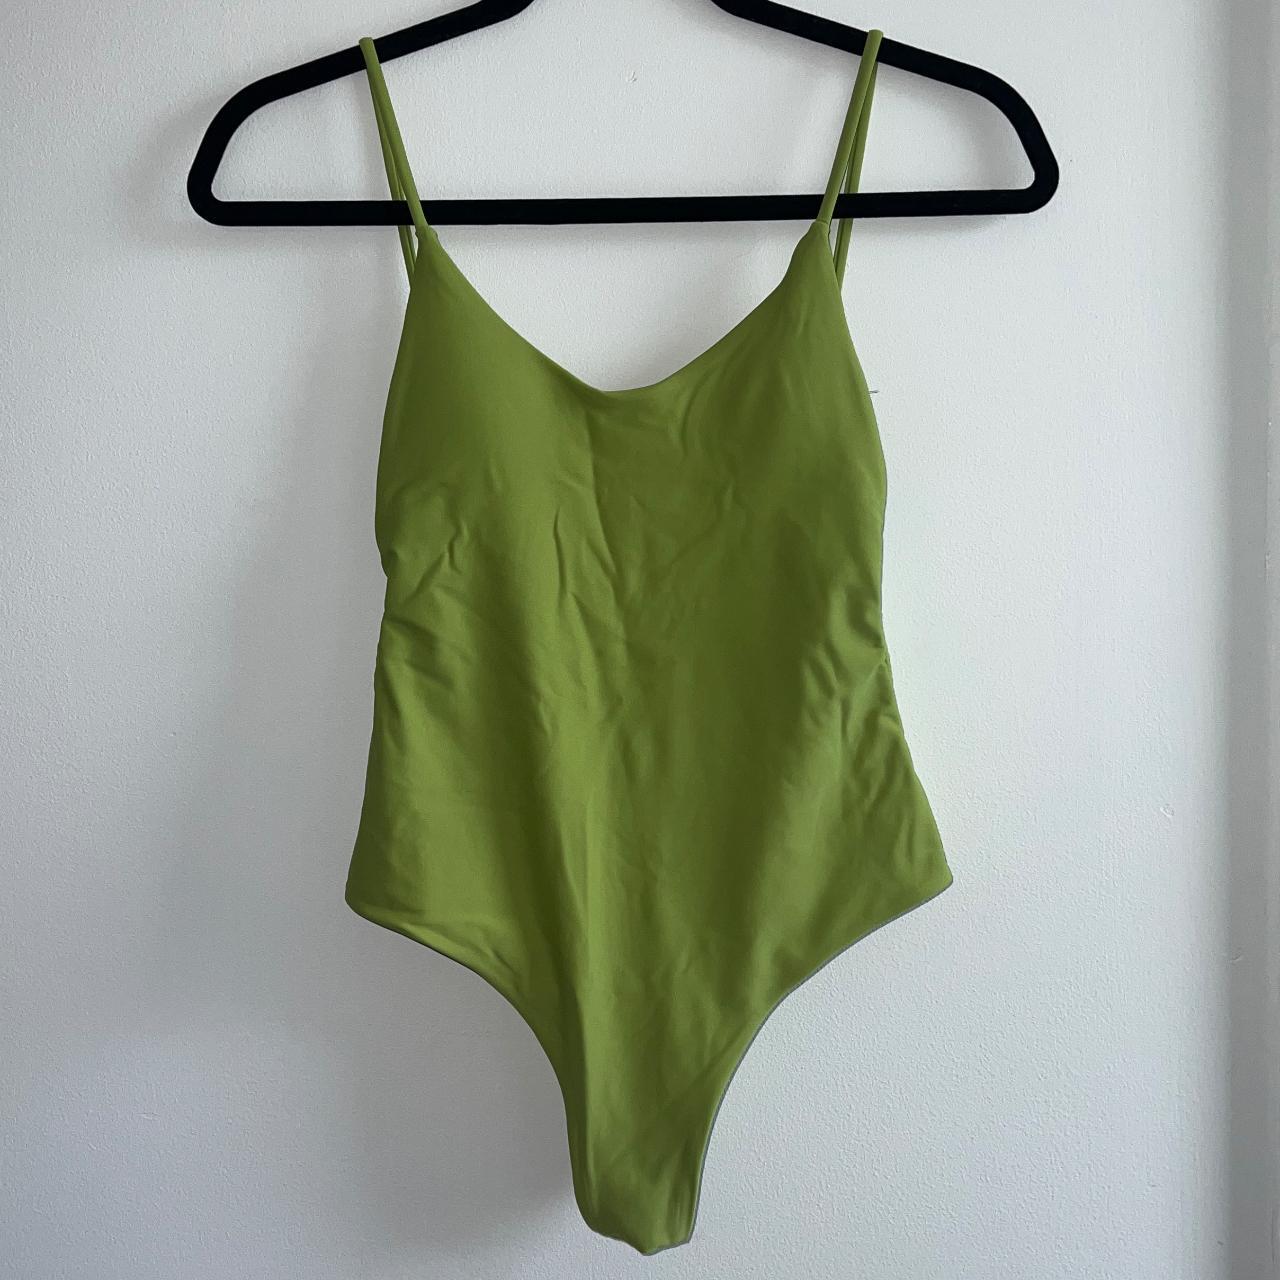 Green one-piece swimsuit cheeky fit; removable cups;... - Depop